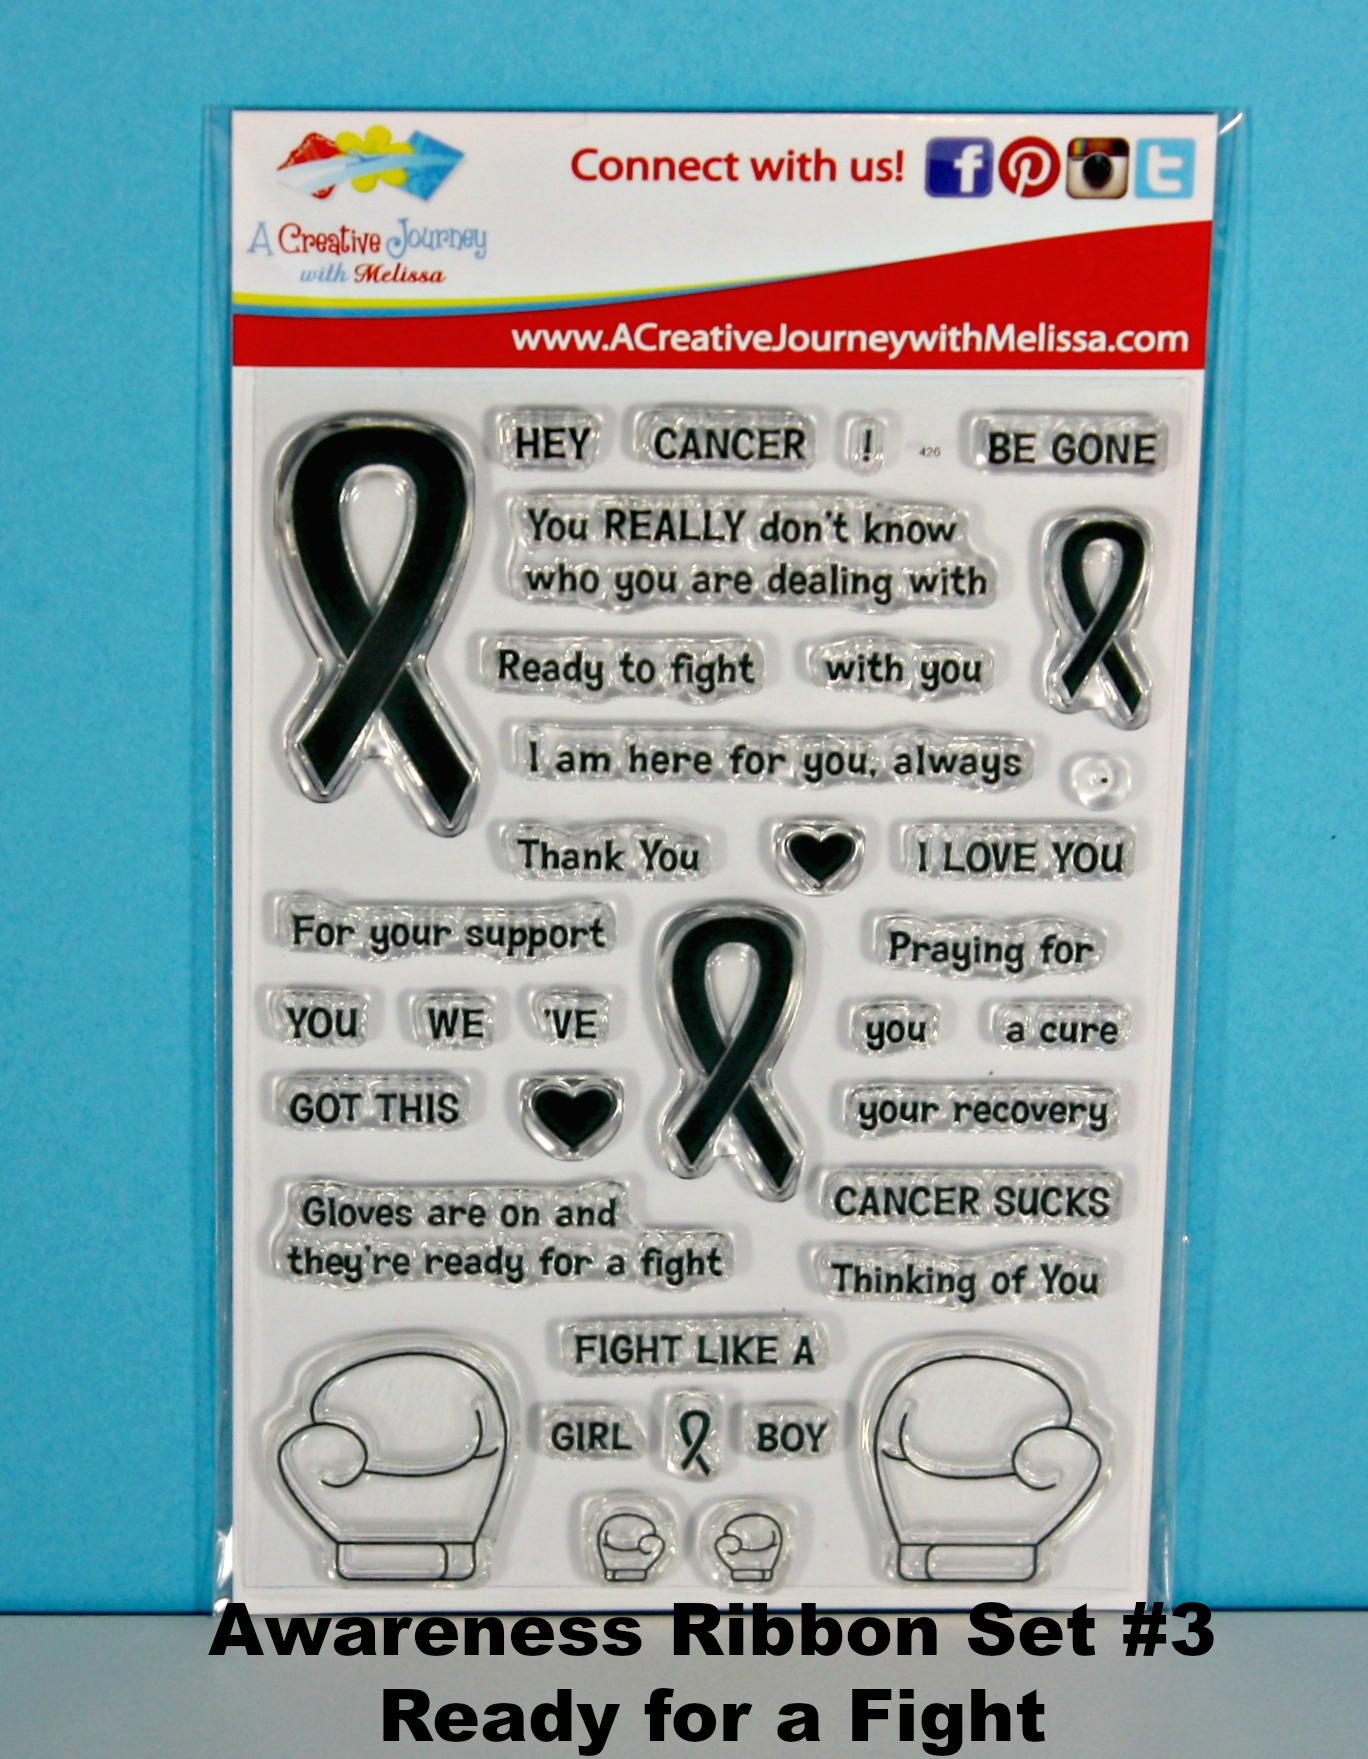 awareness-ribbon-set-3-ready-for-a-fight